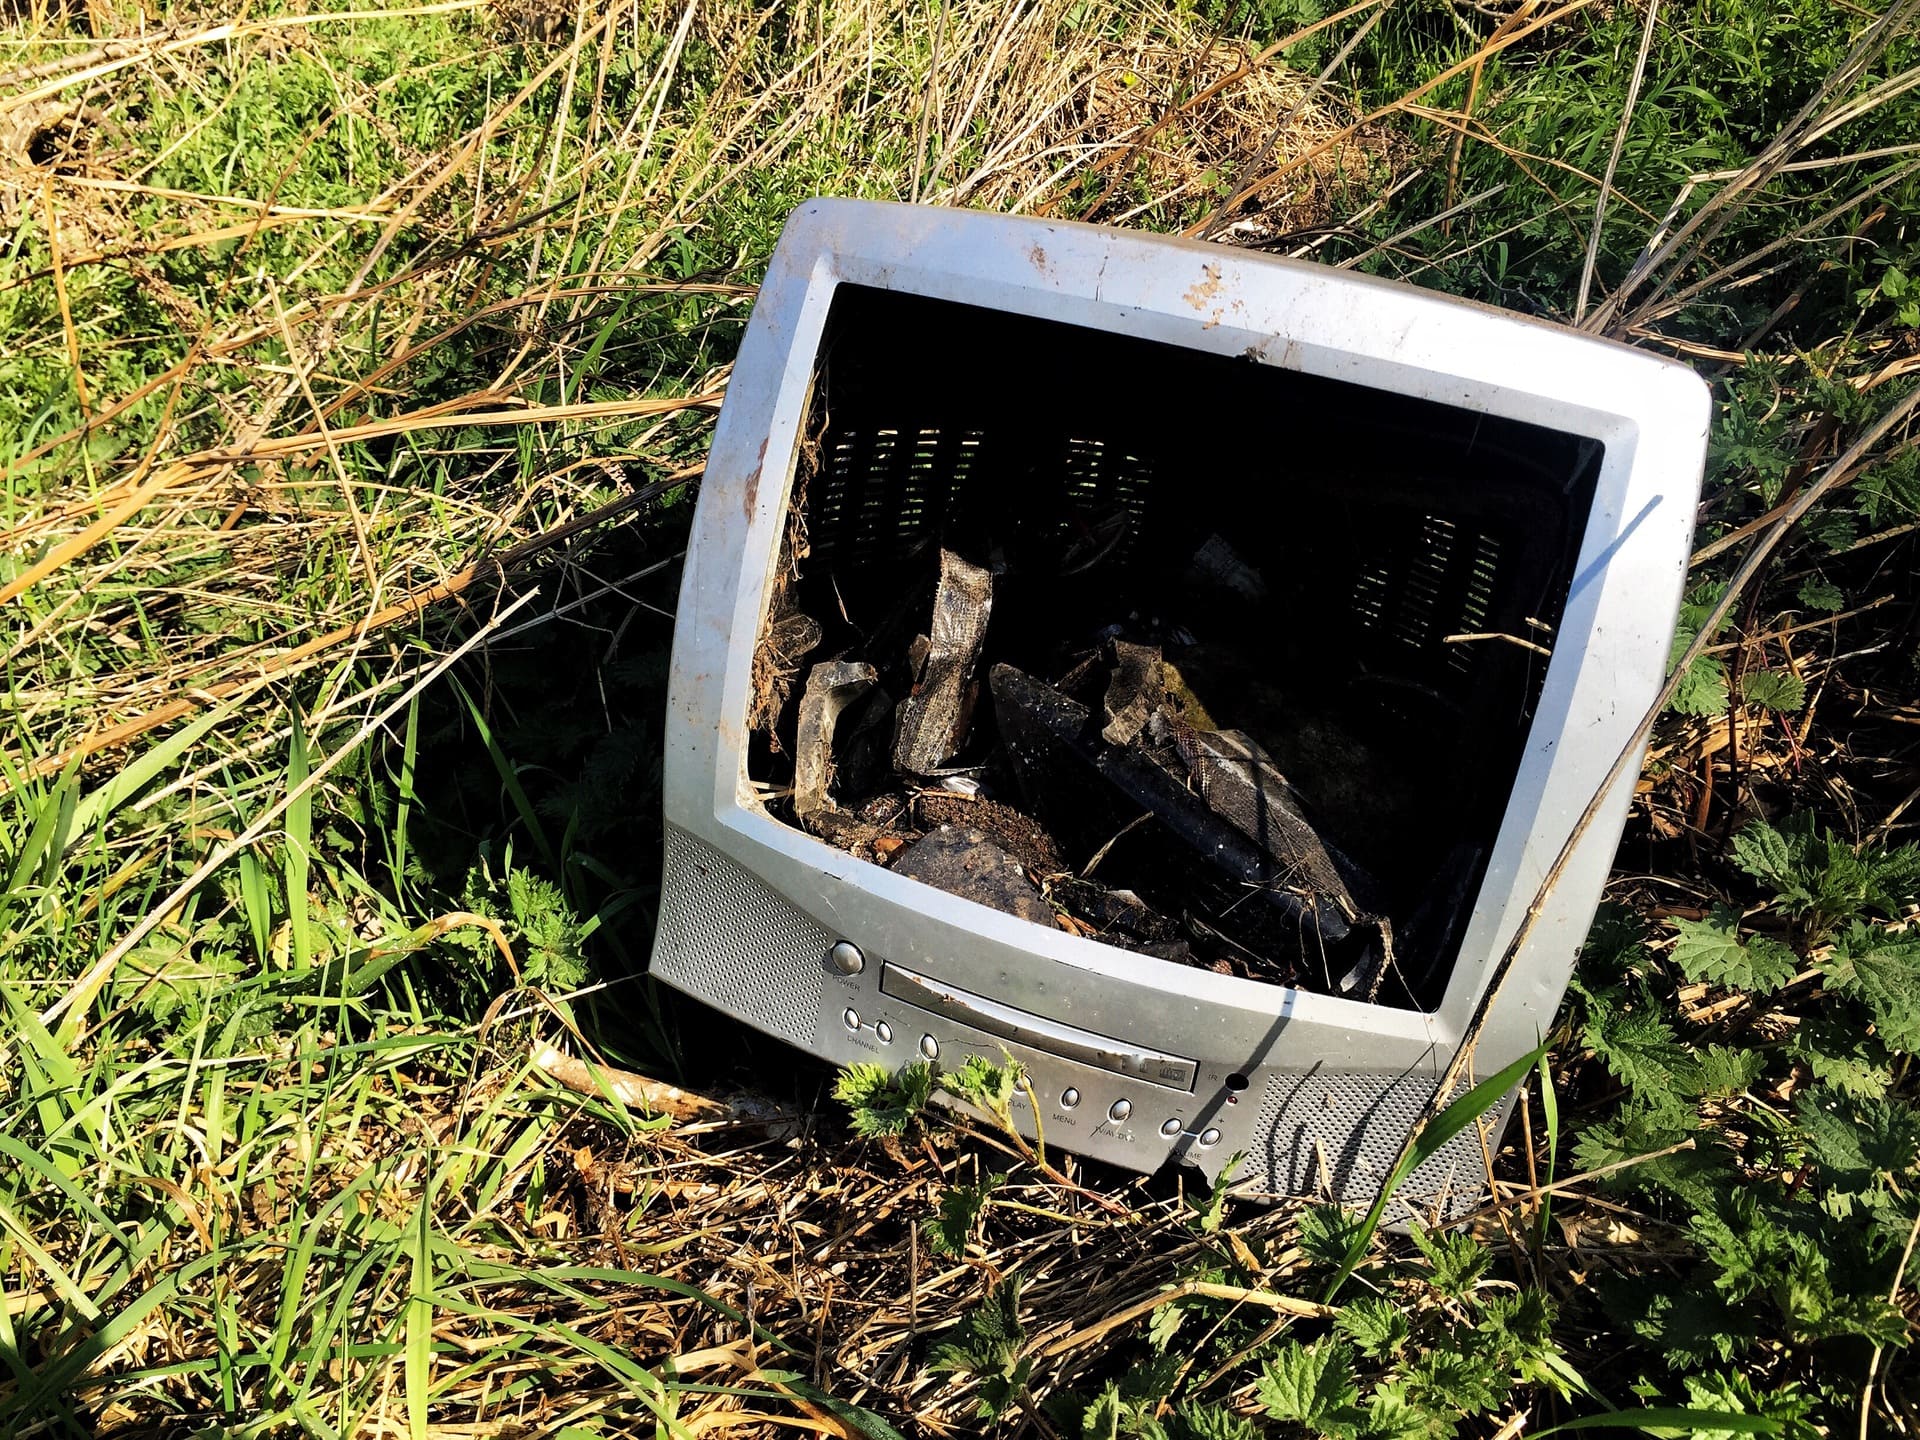 Broken old fashioned TV in the grass